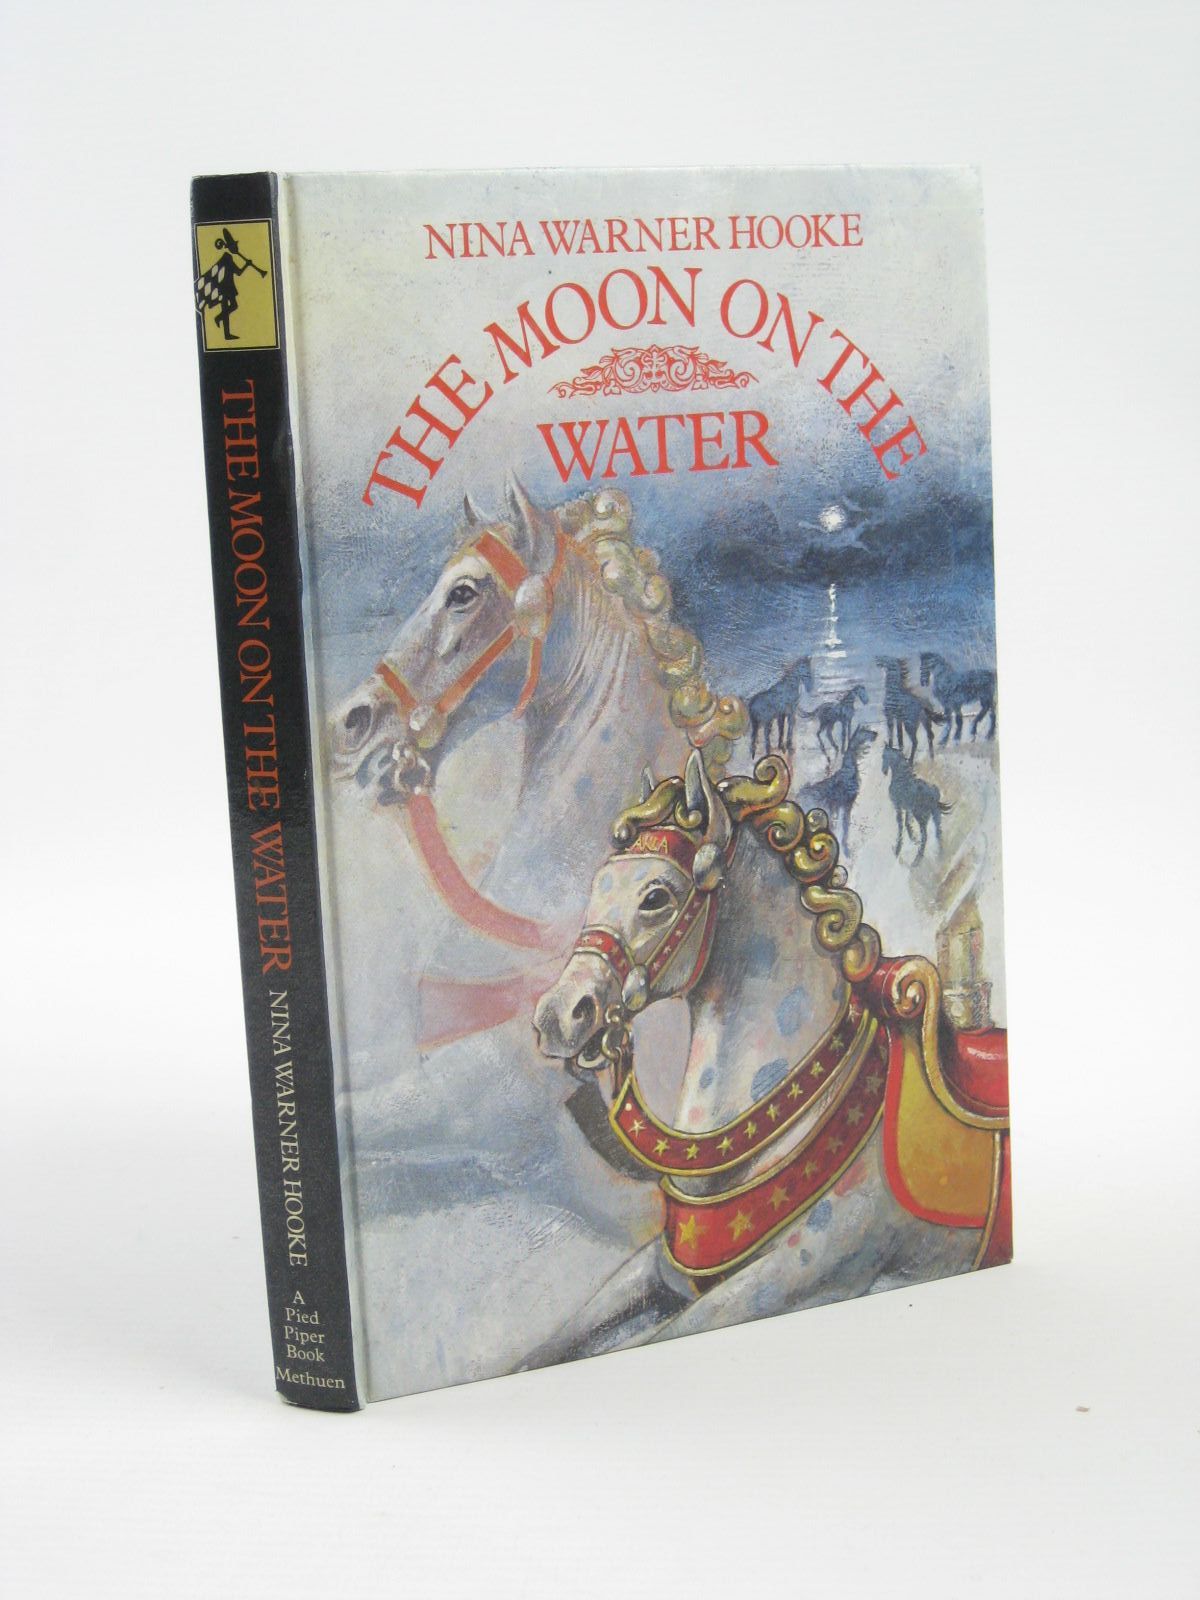 Cover of THE MOON ON THE WATER by Nina Warner Hooke